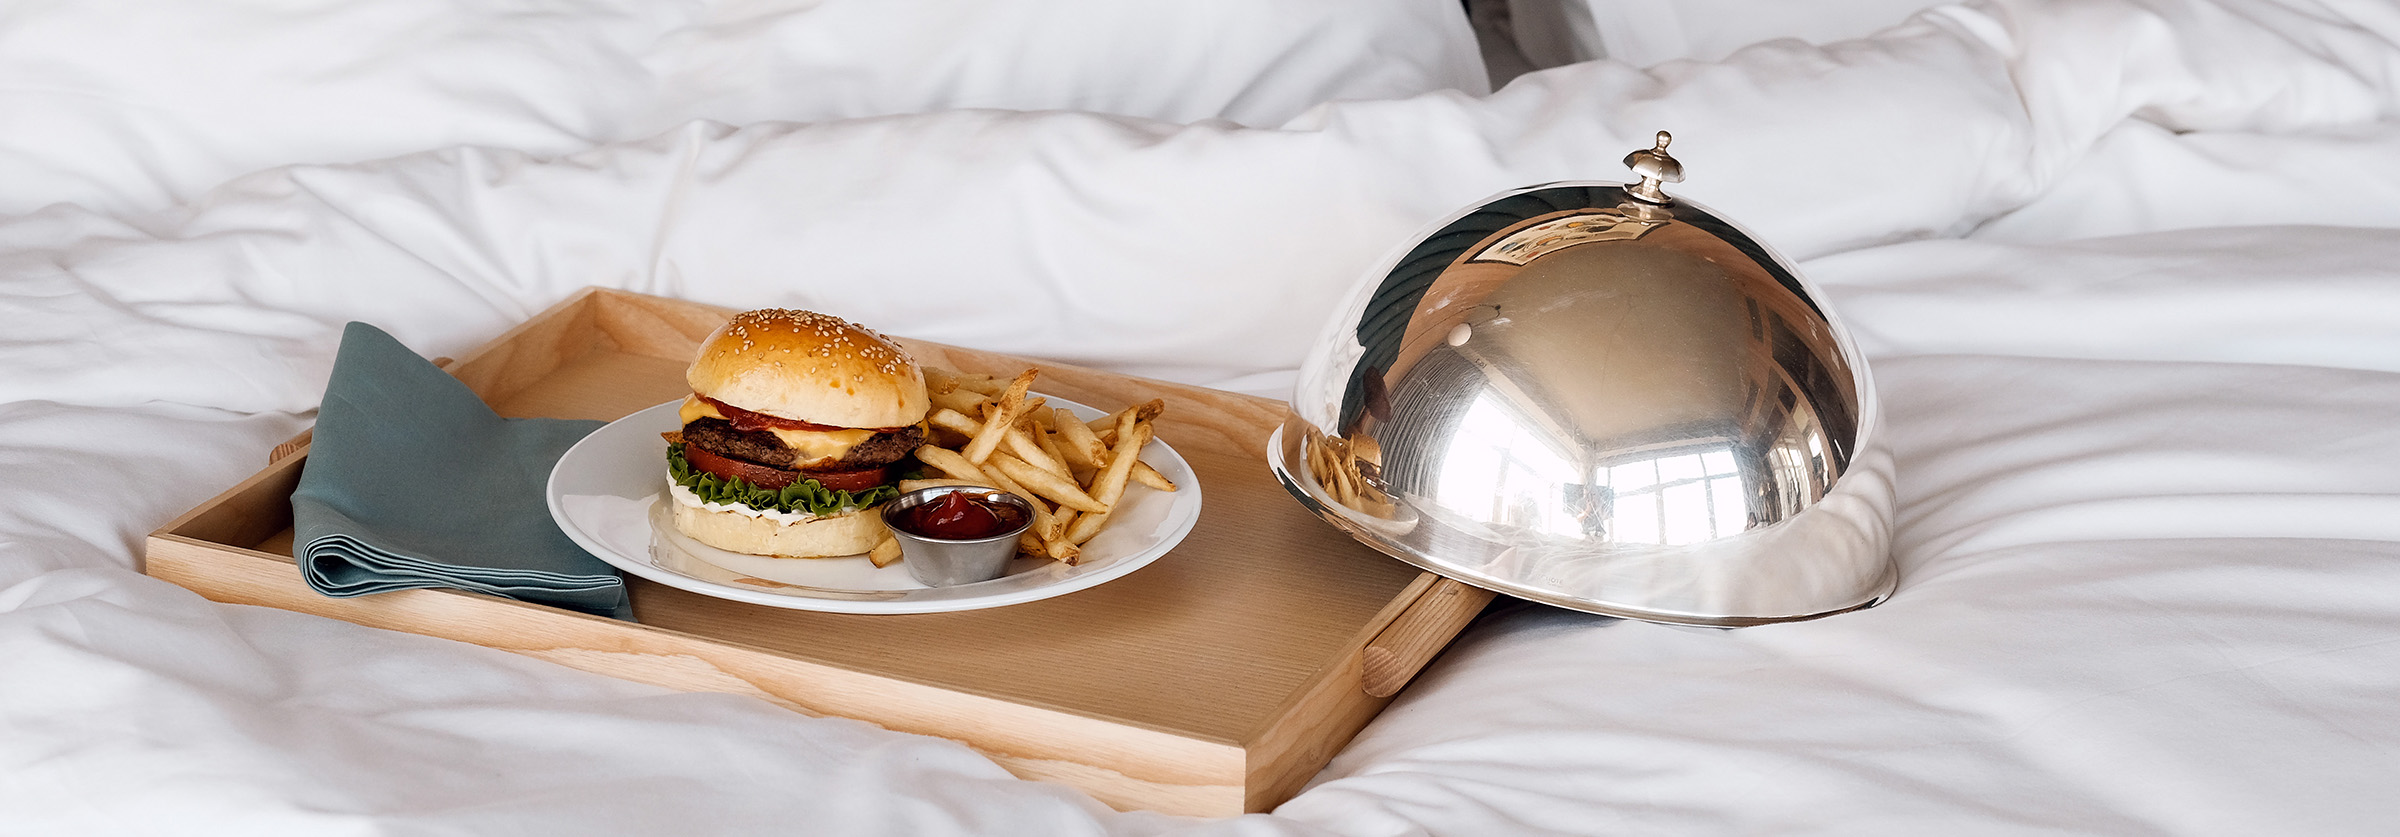 DIET WATER, MELTED ICE CREAM, BLOWFISH AMONG TOP 10 MOST UNUSUAL ROOM SERVICE REQUESTS, HOTELS.COM REPORTS